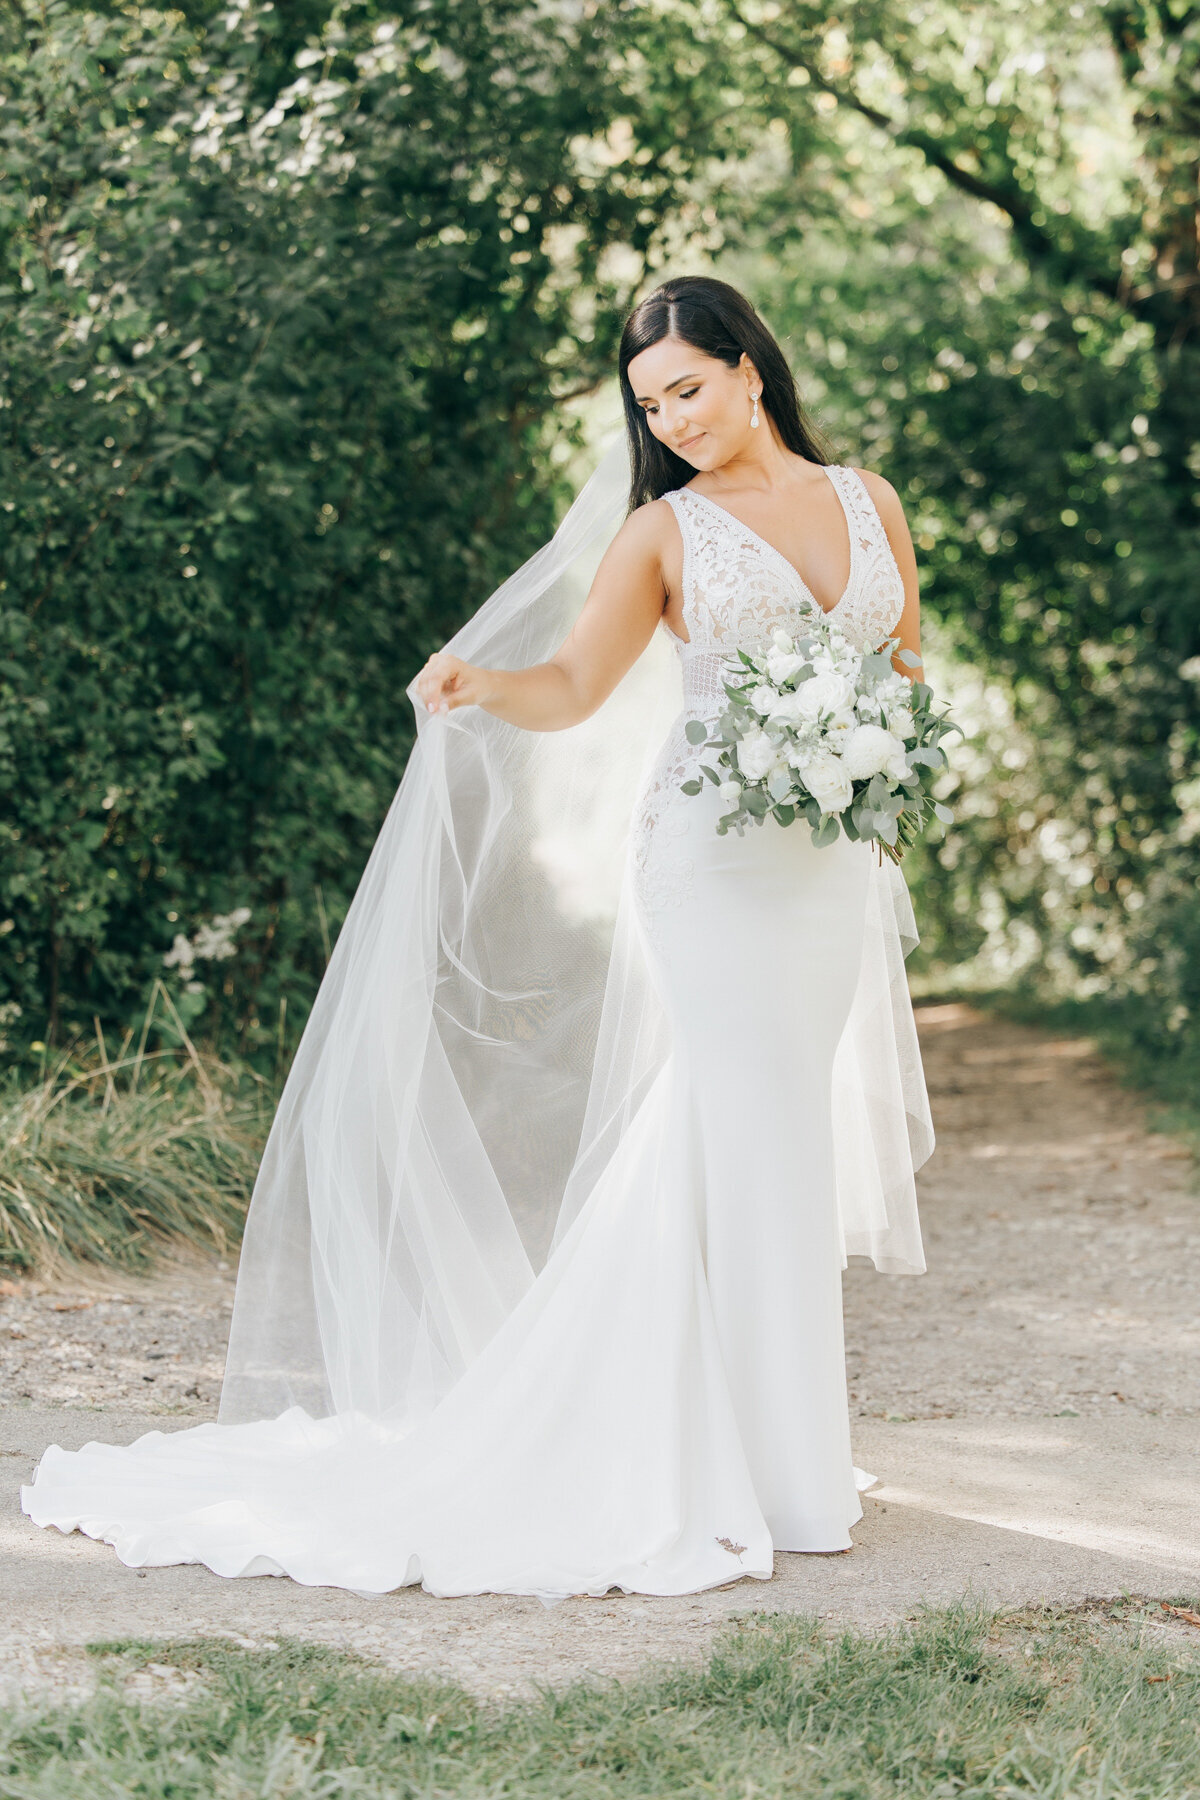 A bride wearing a beautiful white dress, long veil and holding a white wedding bouquet